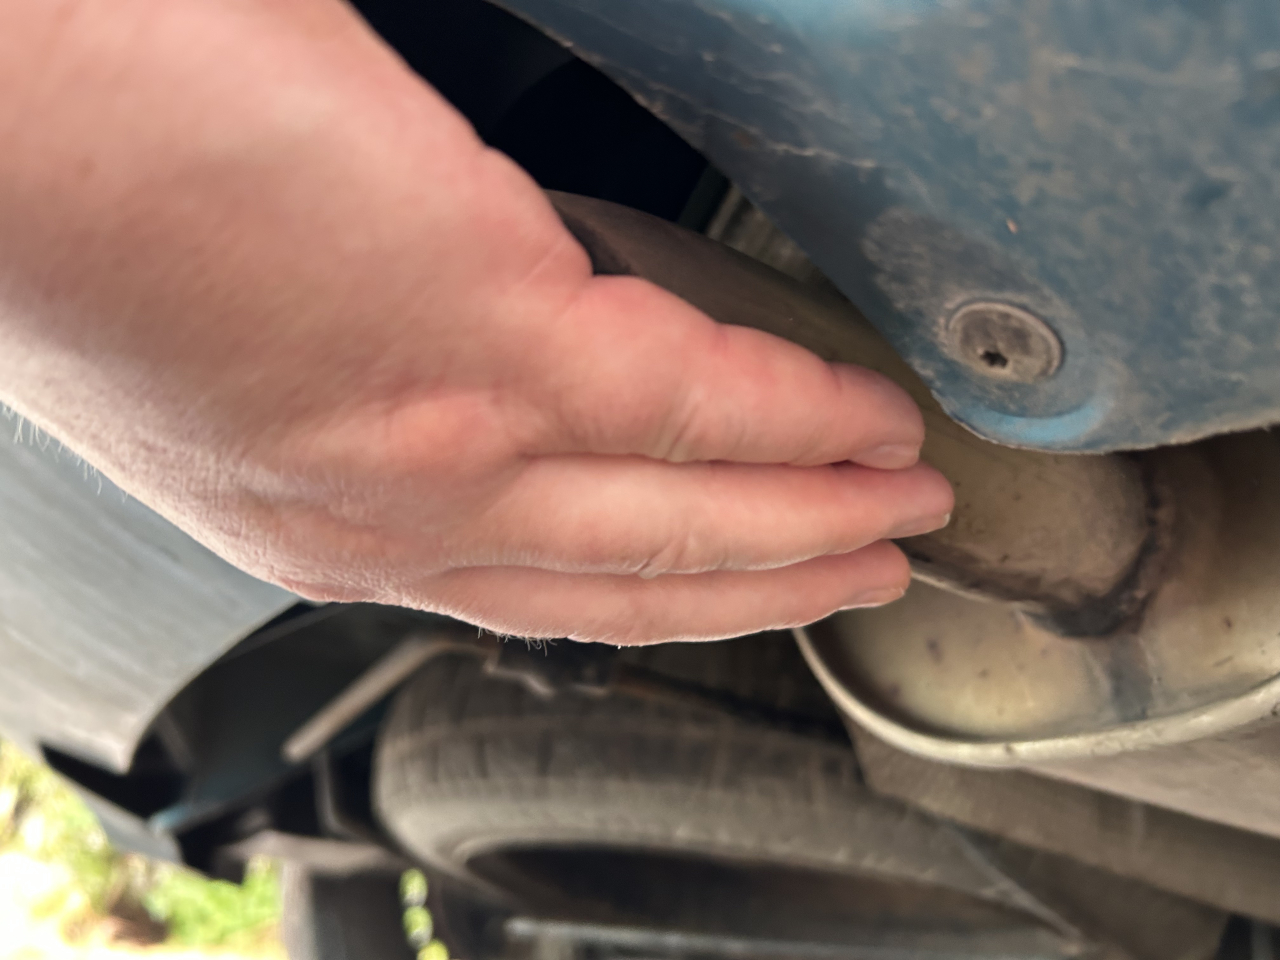 A Picture of a hand covering a car’s exhaust pipe while feeling the engine’s rhythmic put, put, put.